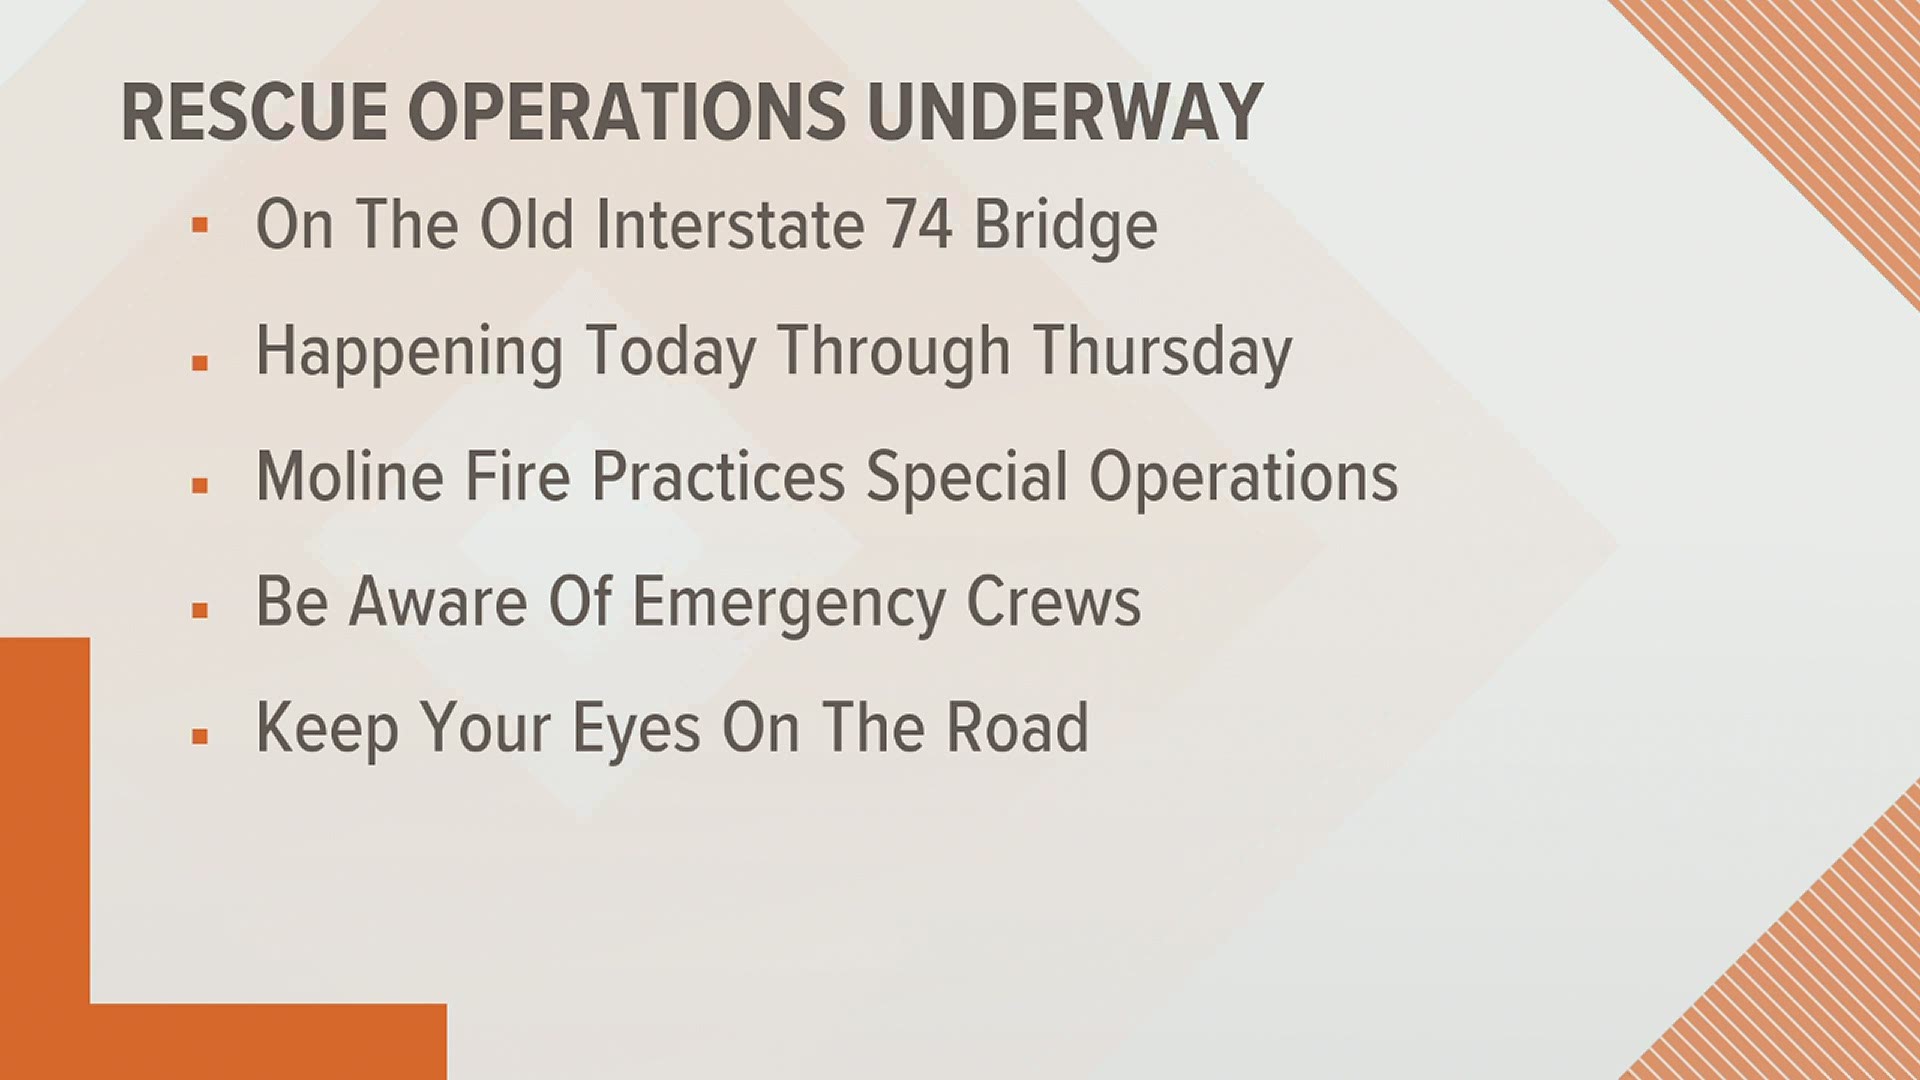 If you see a swarm of emergency vehicles on the old Interstate 74 Bridge span don't be alarmed!